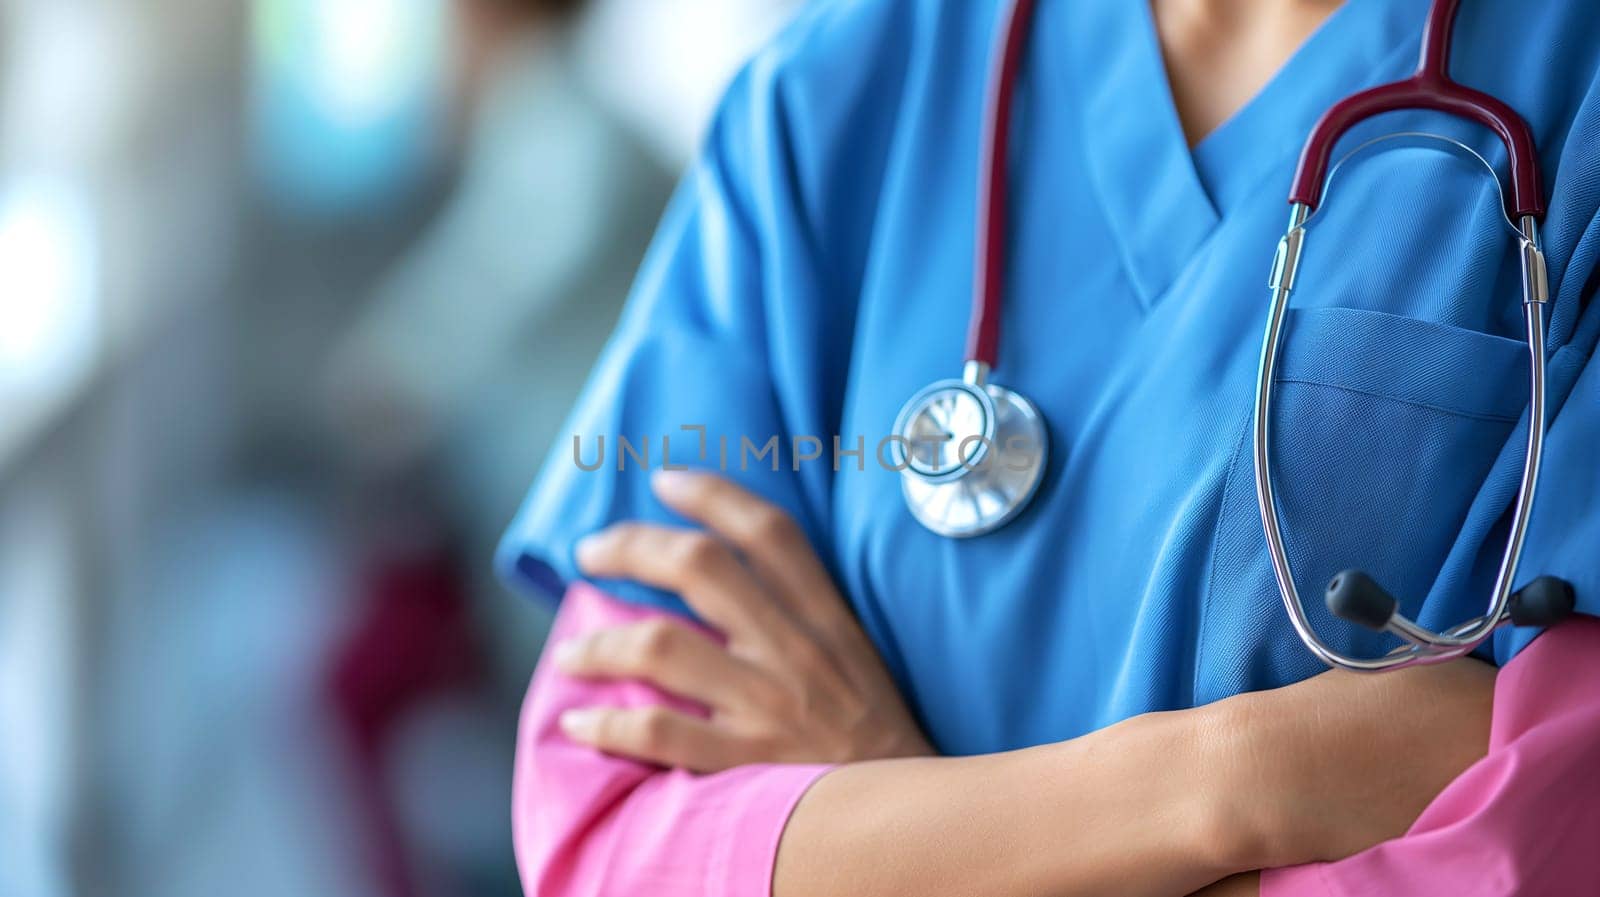 Medical Professional in Blue Scrubs With Stethoscope by chrisroll